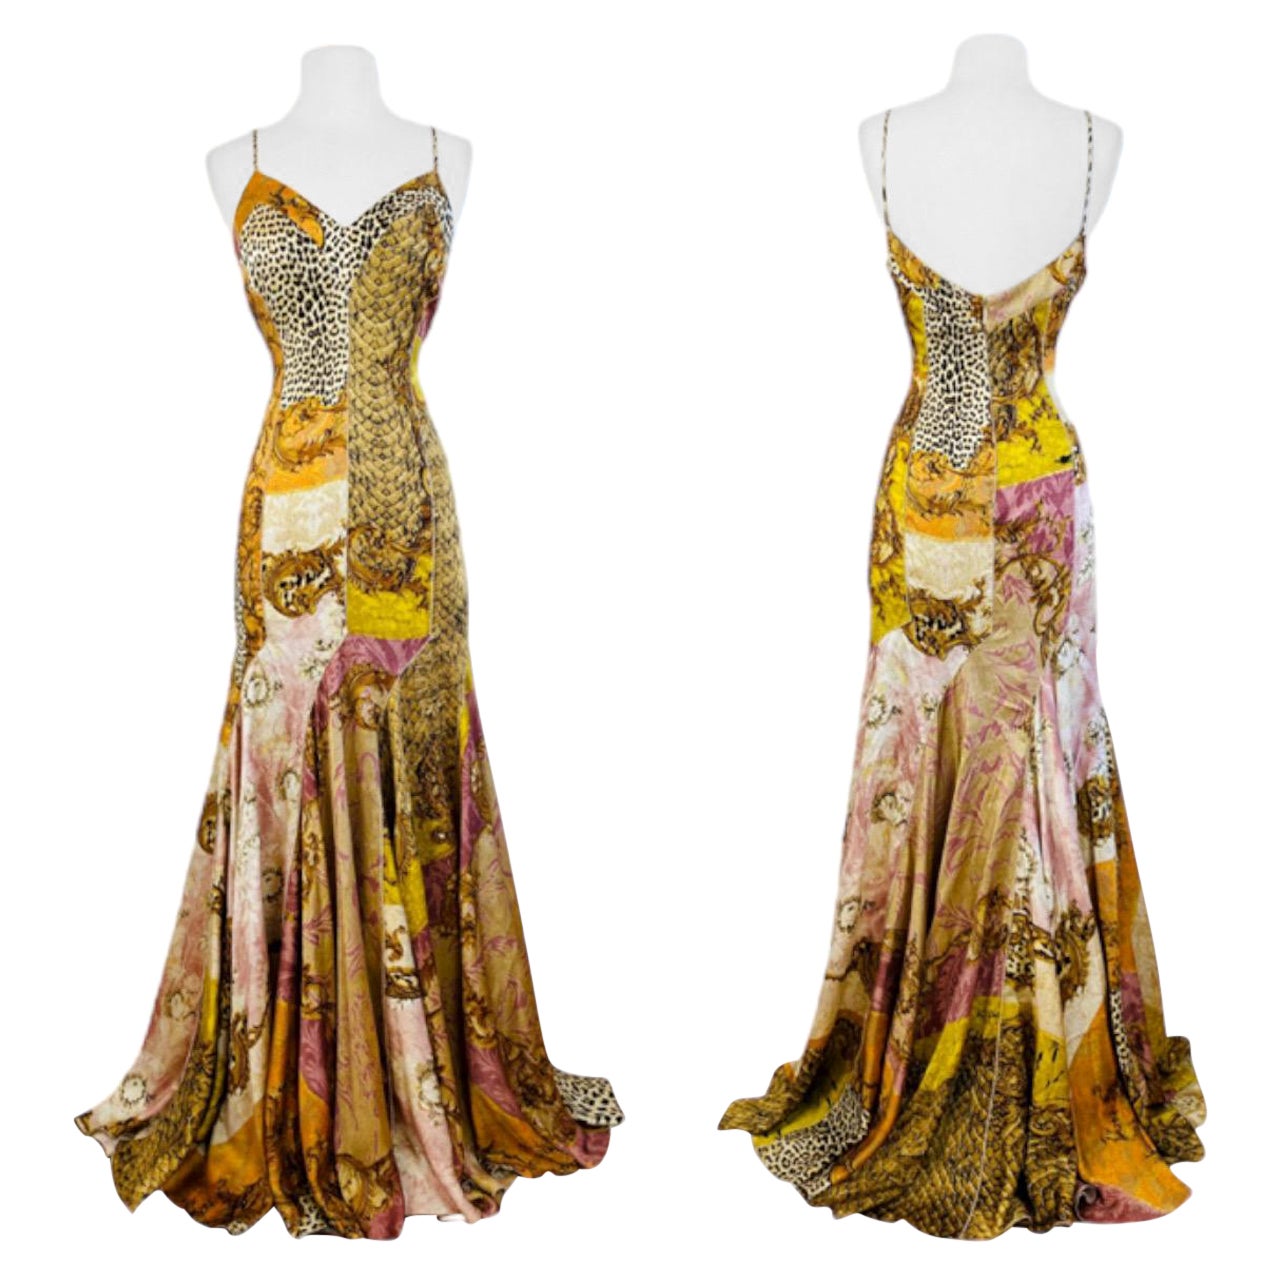 2004 Roberto Cavalli Dress (shown pinned)
Silk maxi length dress
Patchwork baroque, snake, python, cheetah, + leopard print fabric with gold accents throughout
Roberto Cavalli signature in various spot on dress
Thin shoulder straps
V neckline
Fitted